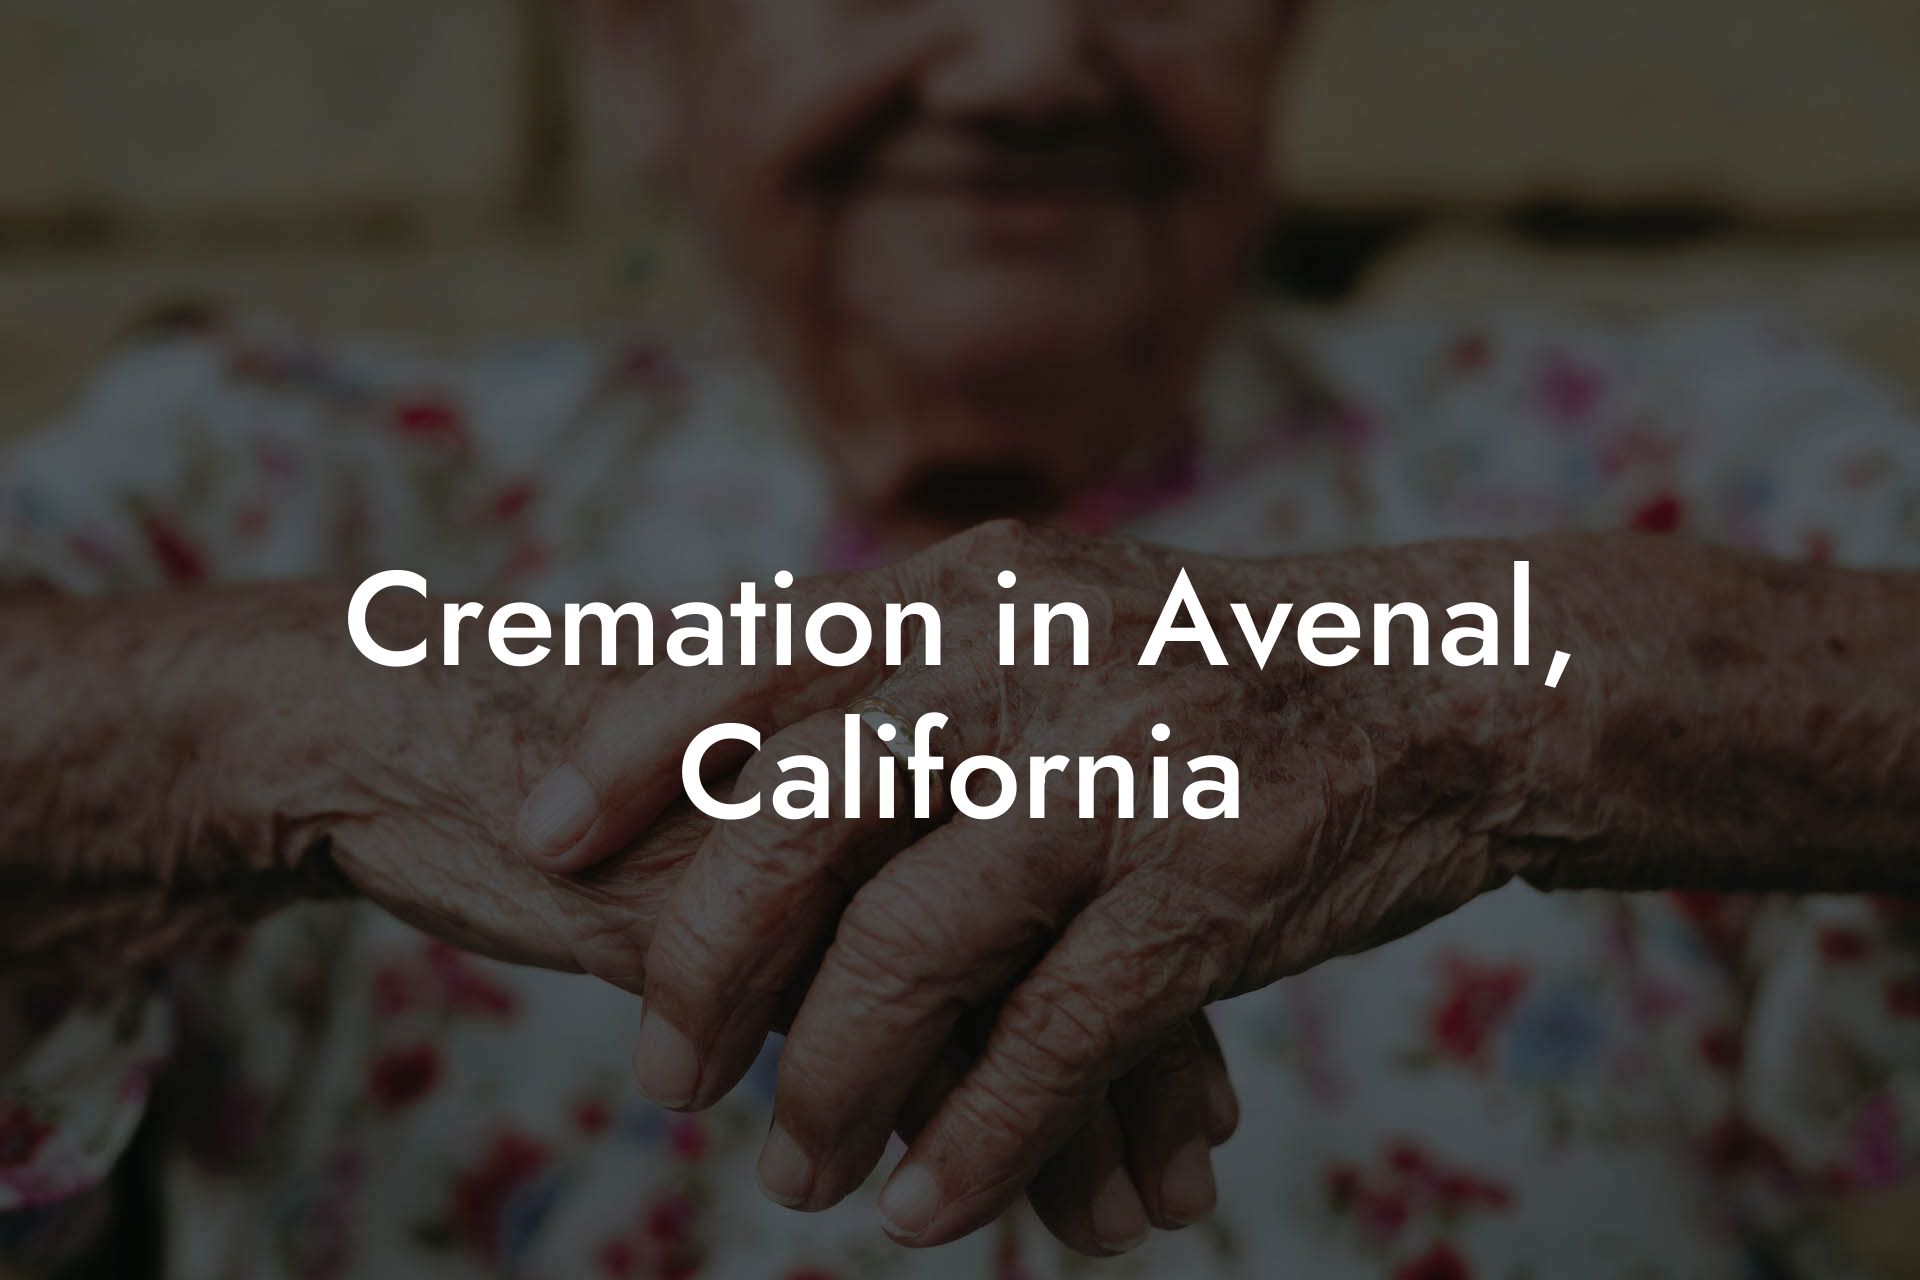 Cremation in Avenal, California